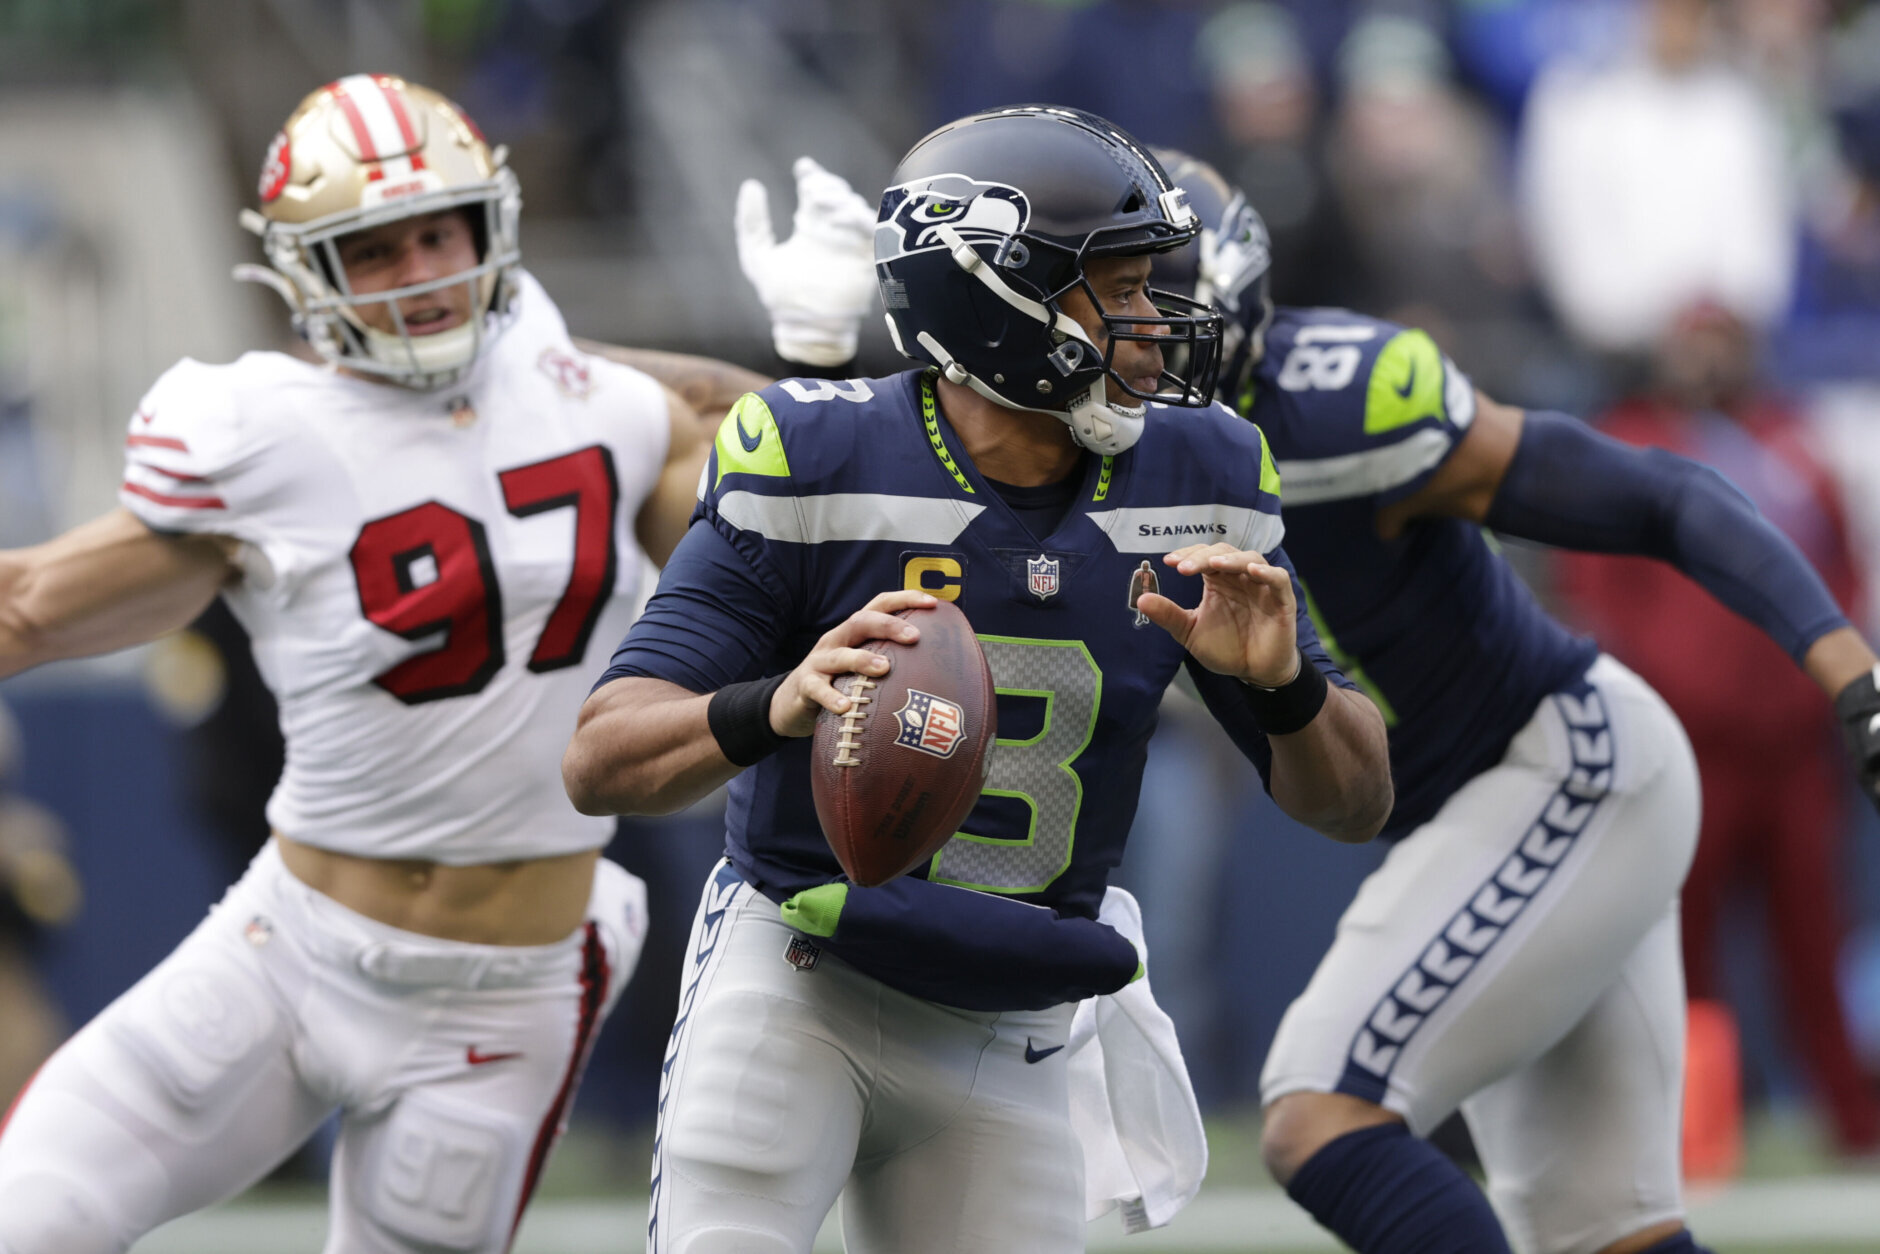 <p><em><strong>49ers 23</strong></em><br />
<em><strong>Seahawks 30</strong></em></p>
<p>I don&#8217;t think Seattle makes the playoffs but this was a reminder that Russell Wilson and company won&#8217;t just go quietly into the night. The Seahawks are here to play spoiler.</p>
